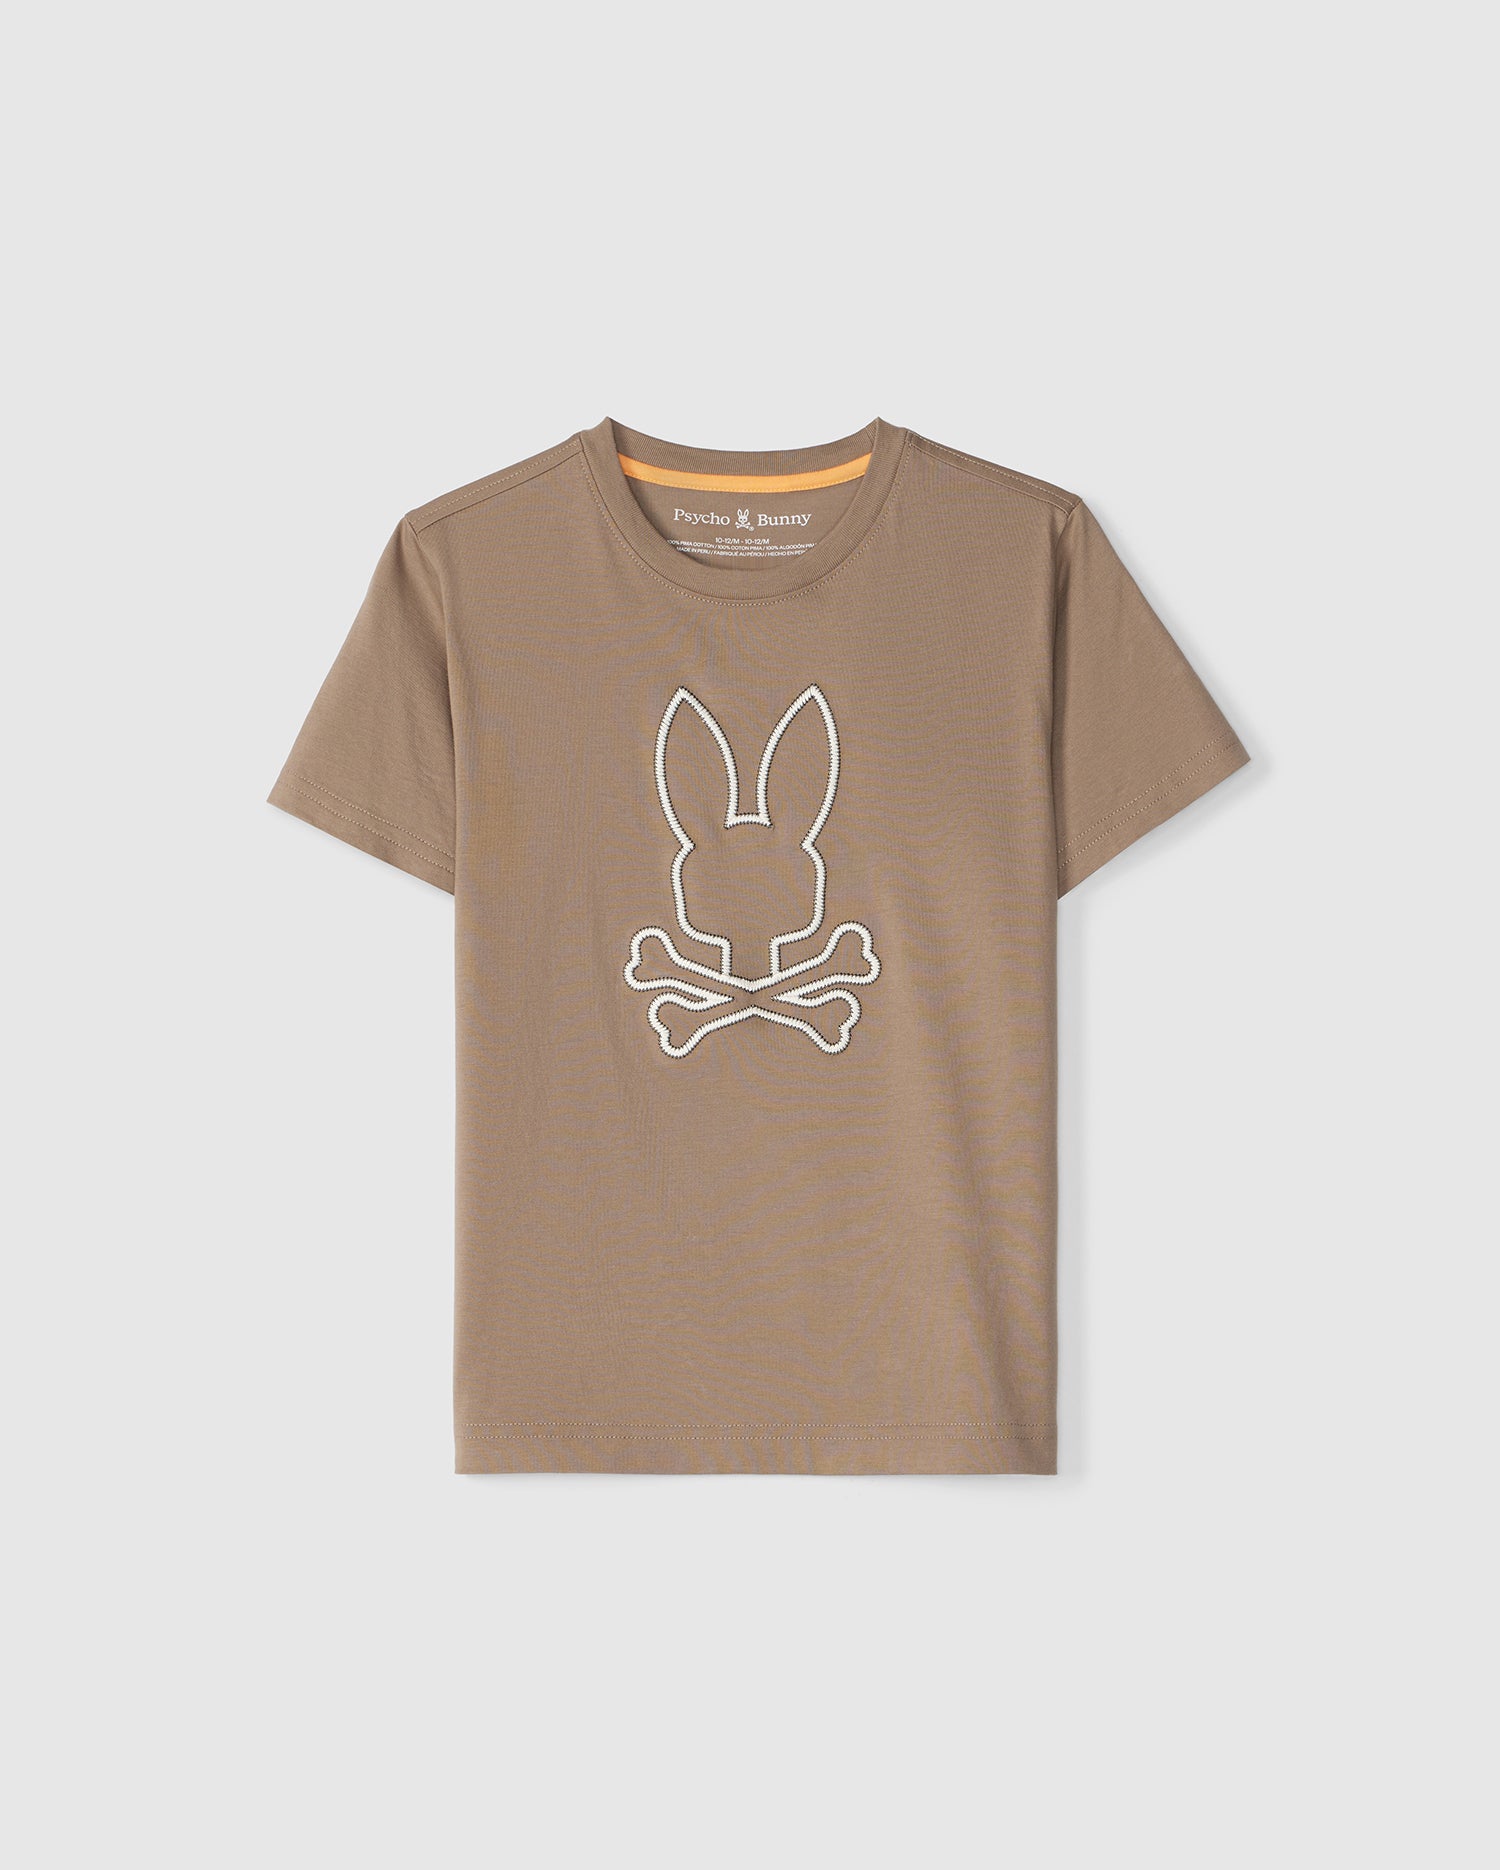 A tan **KIDS FLOYD GRAPHIC TEE - B0U338B2TS** from **Psycho Bunny** features a large white bunny head above crossbones on the front. The T-shirt has a round neckline and short sleeves, with the label reading 